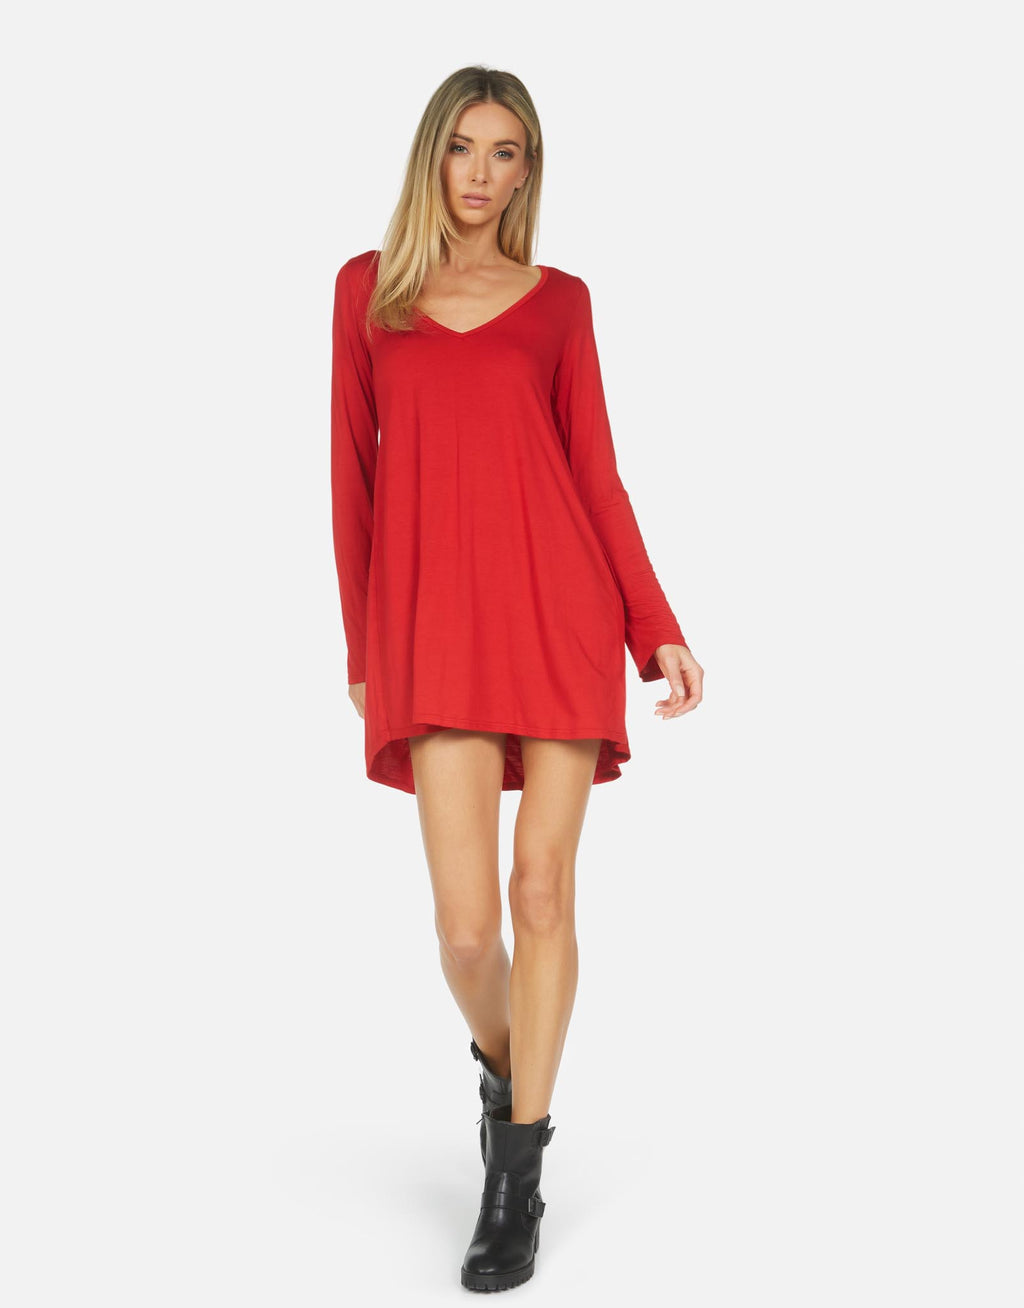 Long Sleeve Candy Red V-Neck Dress | Kyle by Michael Lauren